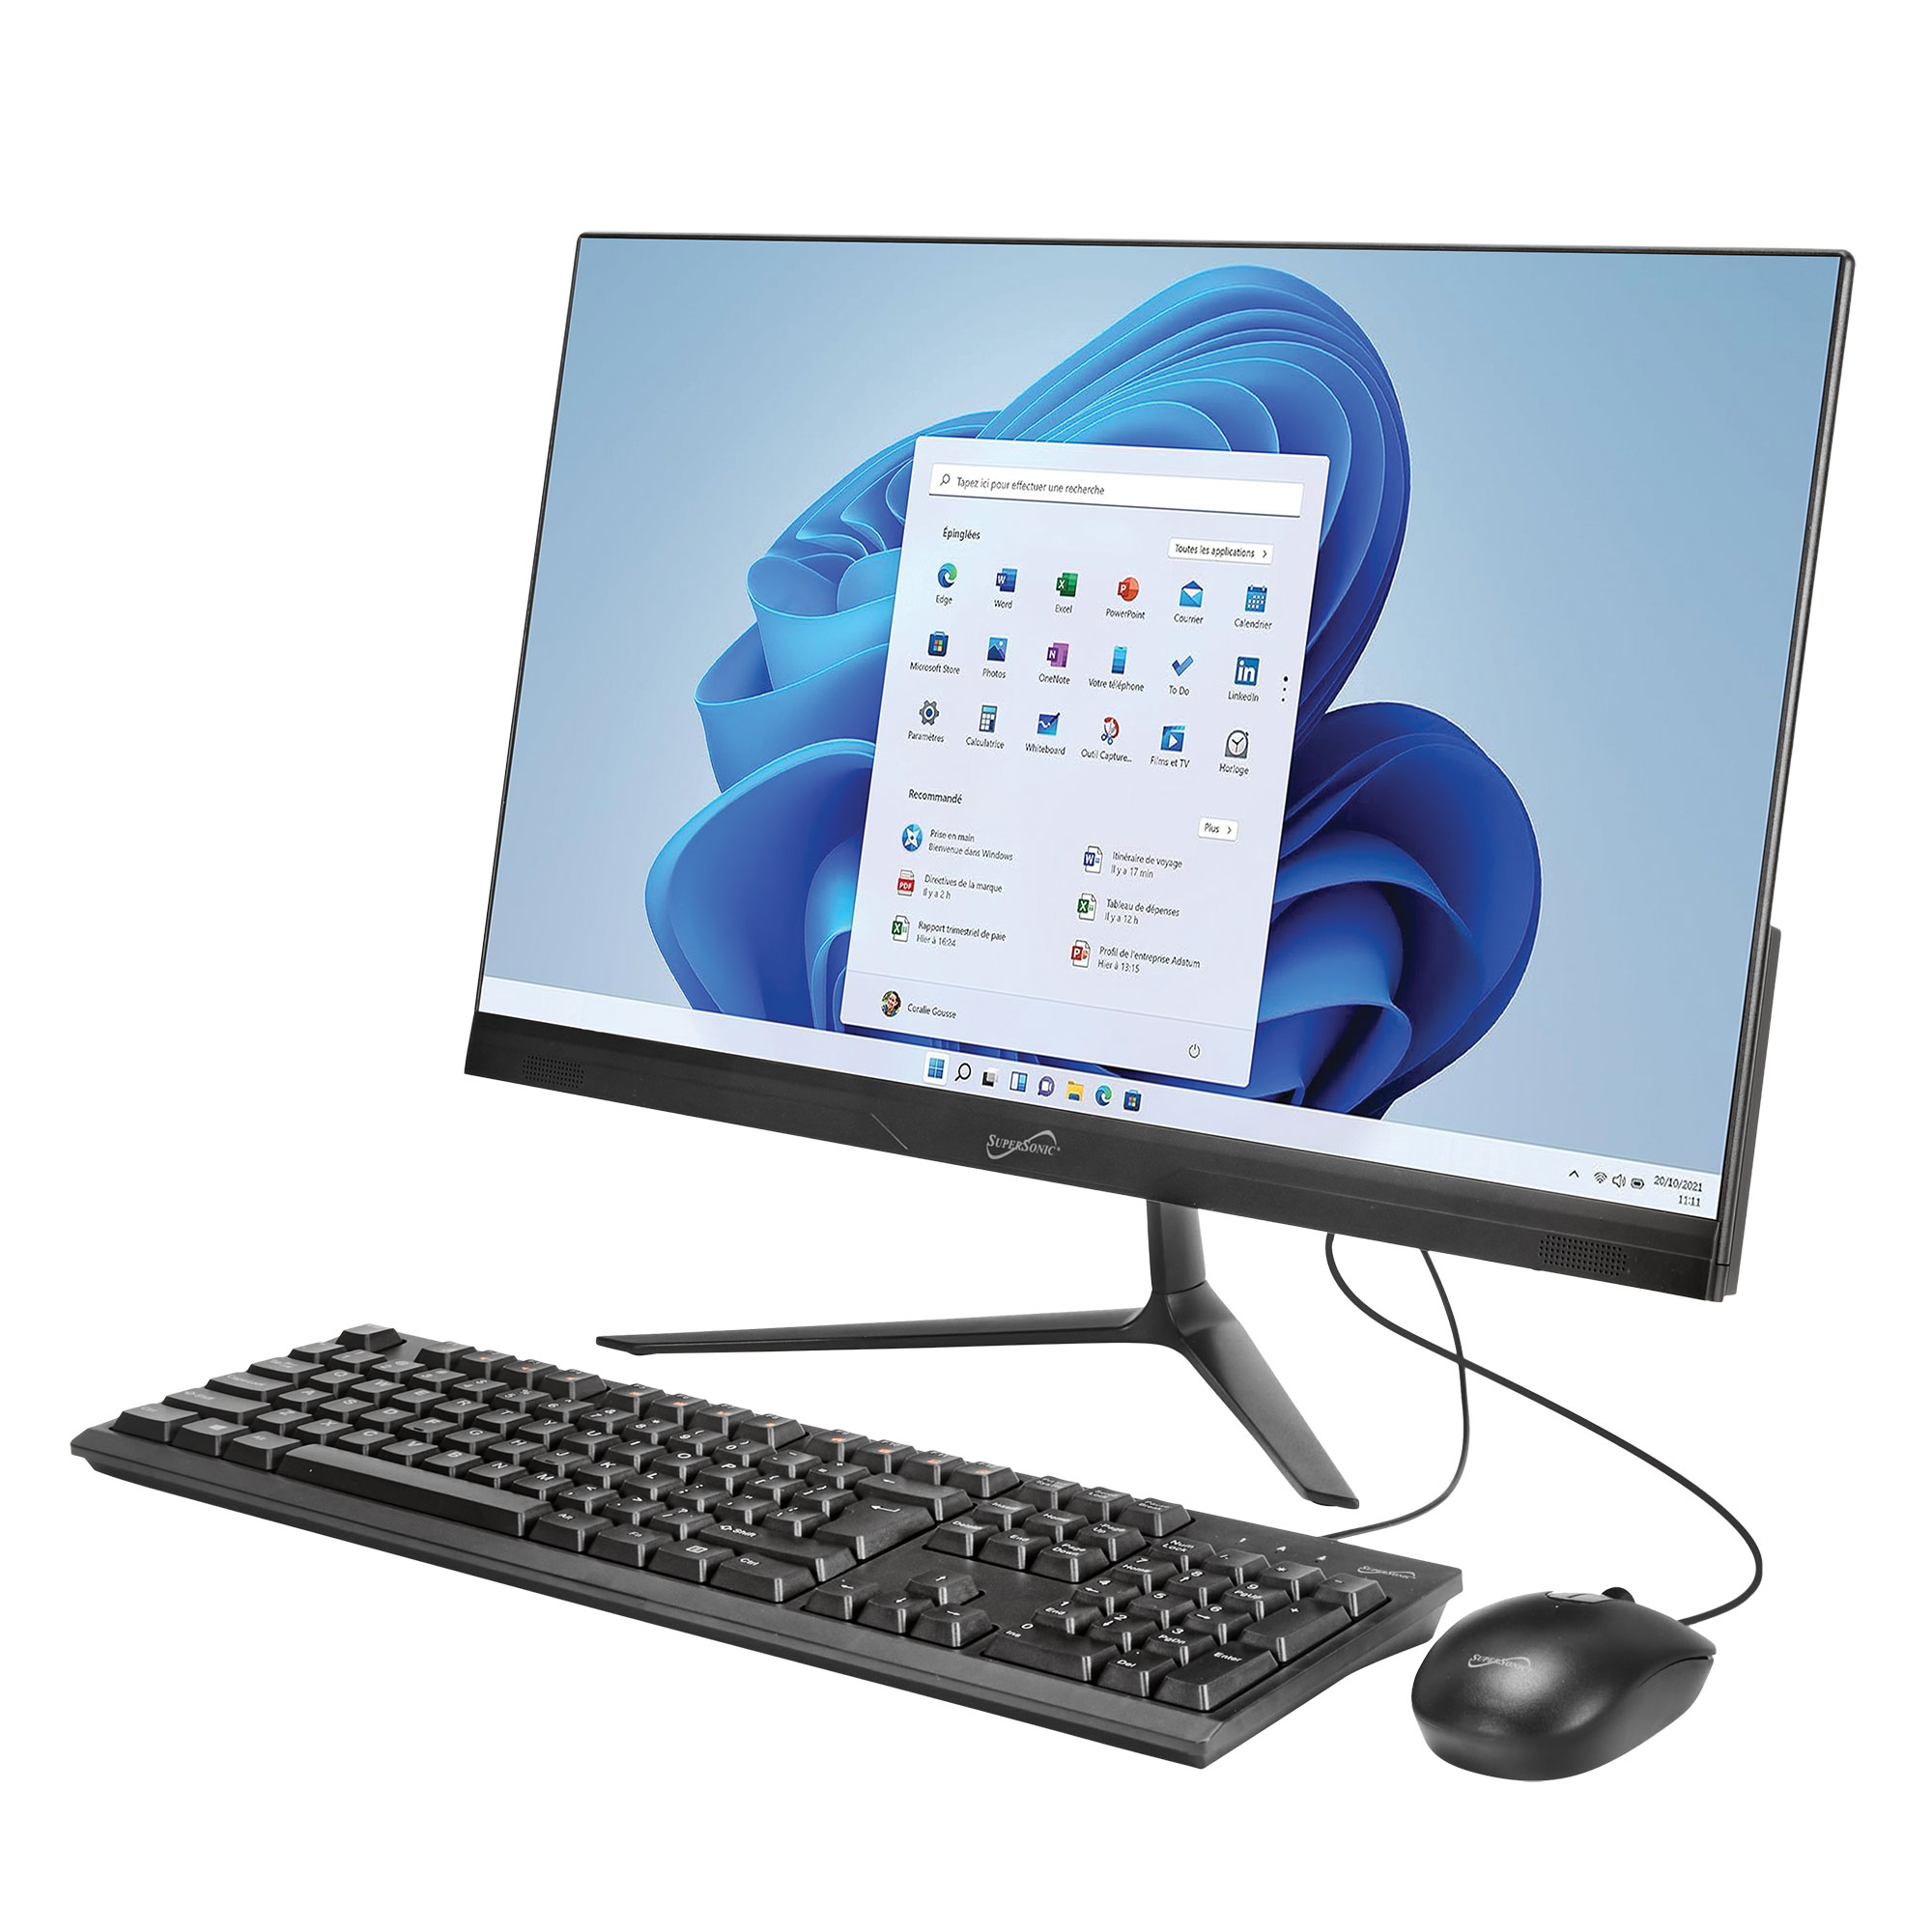 24" All-in-One Computer